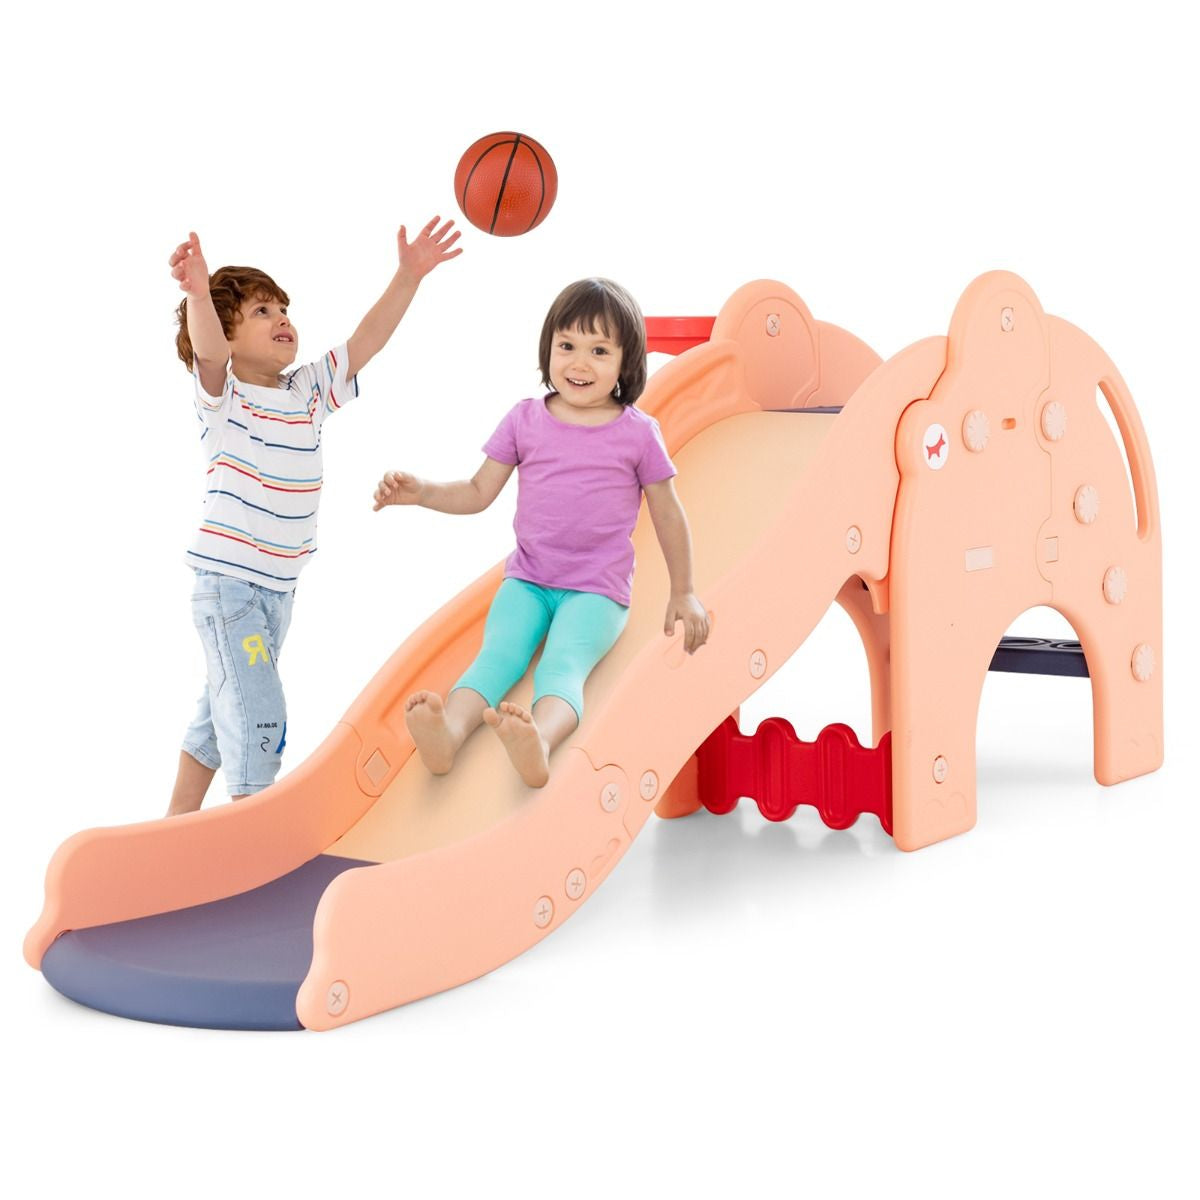 Elephant Shaped Kids Play Slide 4 in 1 Slide with Basket and Basketball Buffer Zone Anti-Slip Rails for Kids Pink/Green